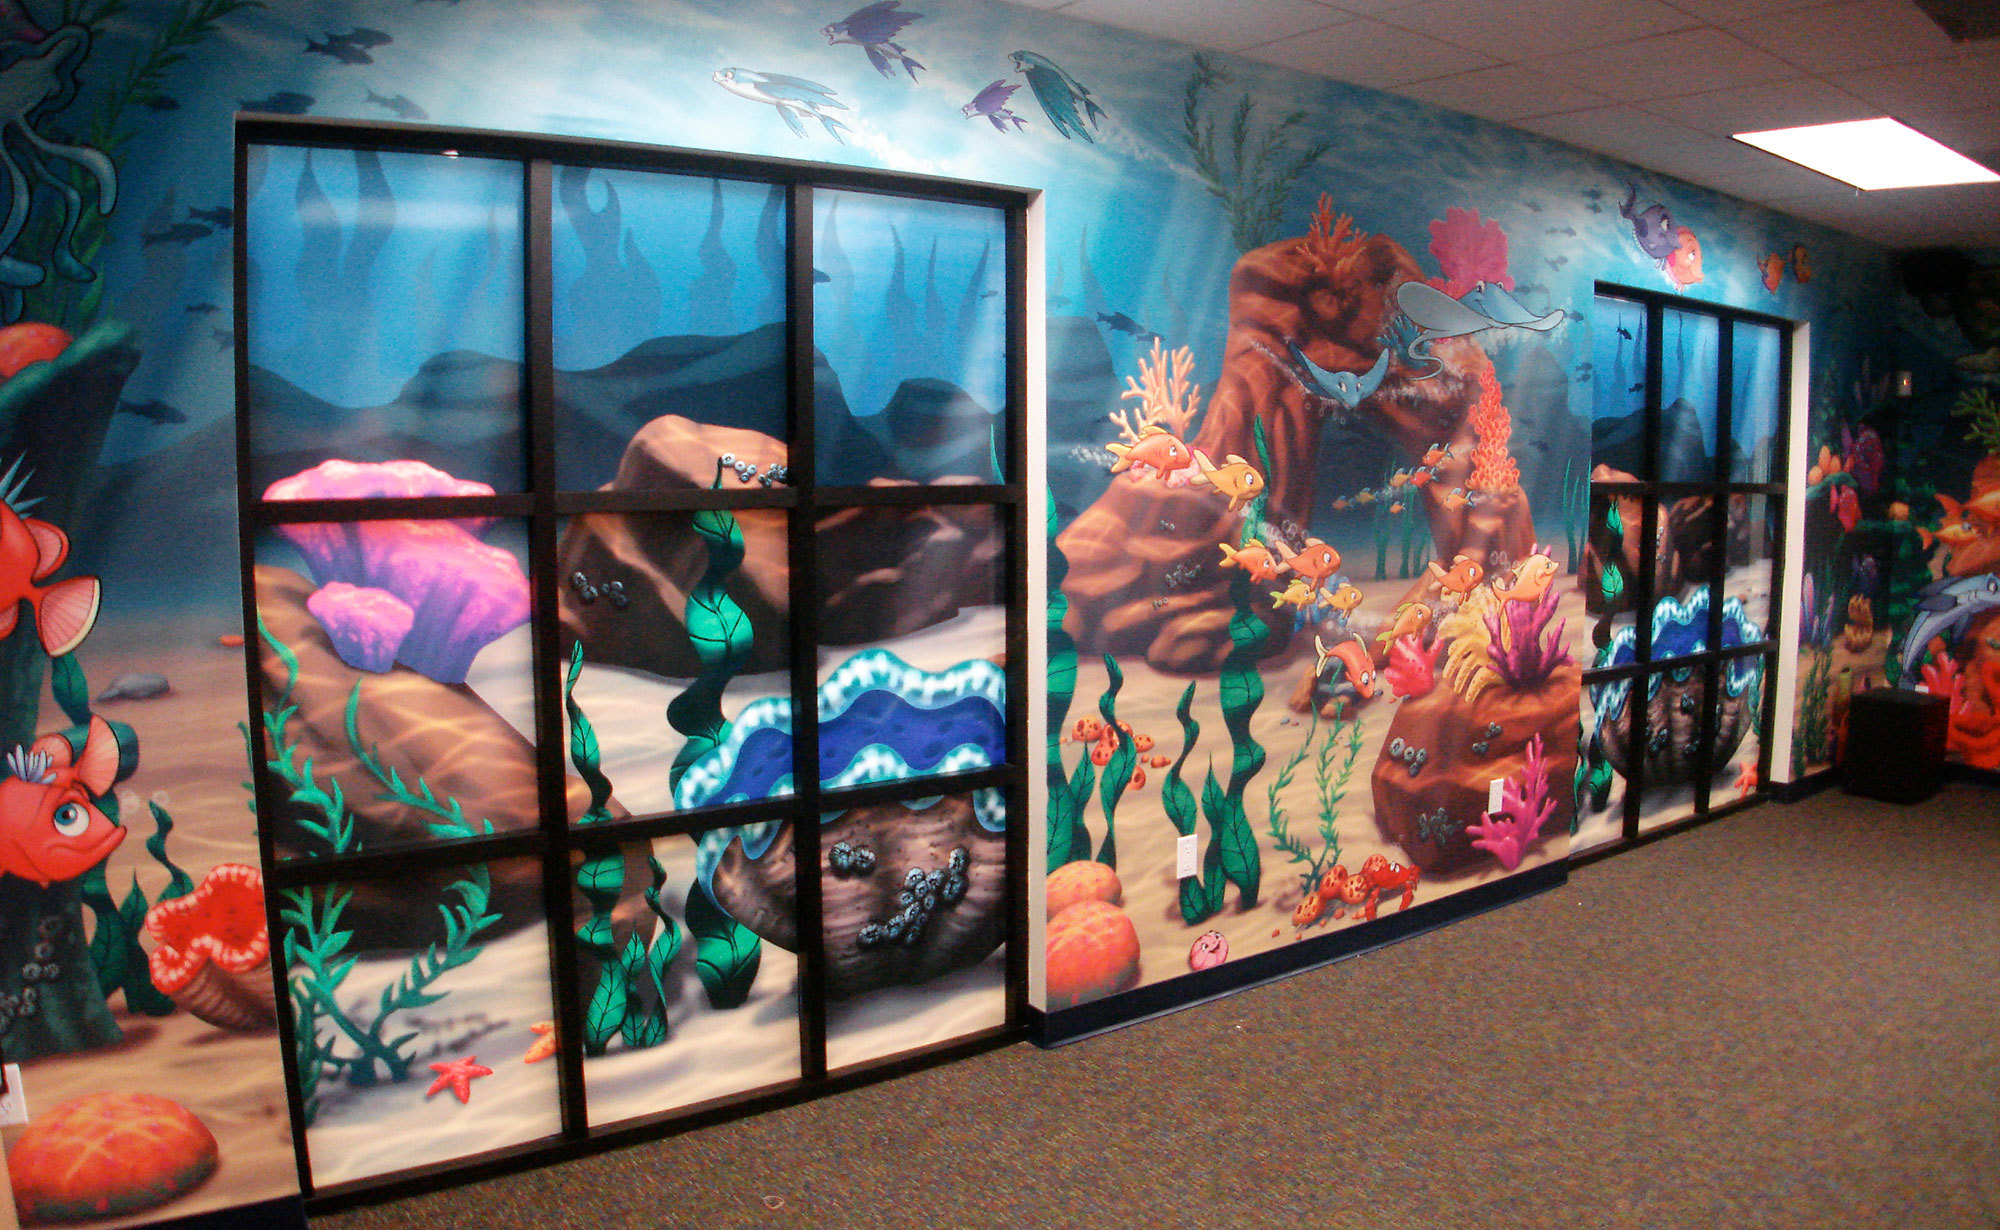 Example of Undersea Themed Window Vinyl with Wall Covering depicting sea floor with coral reef, fish and plants at a Church